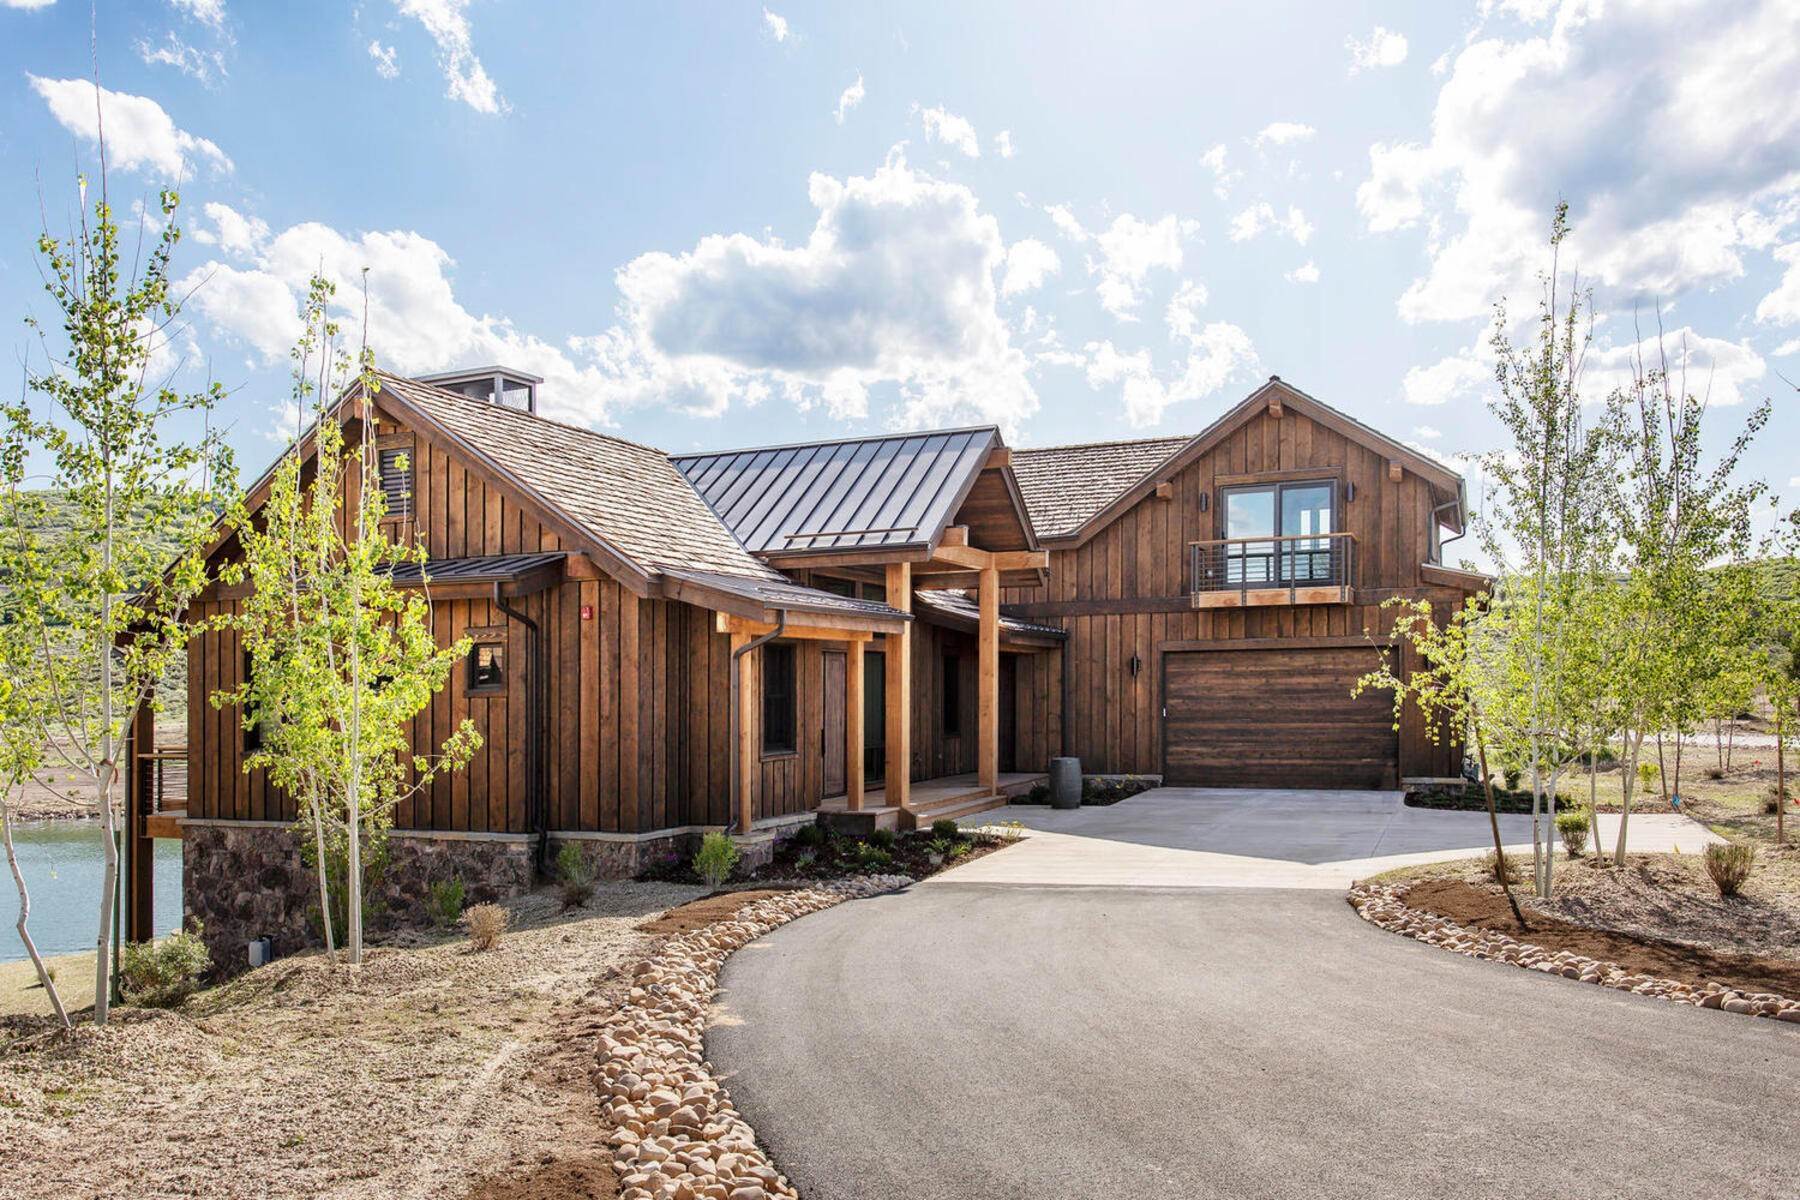 Single Family Homes for Sale at 5 Bedroom Expanded Juniper Cabin at Victory Ranch on 2.3 Acres! 6434 Whispering Way, #373A Heber City, Utah 84093 United States